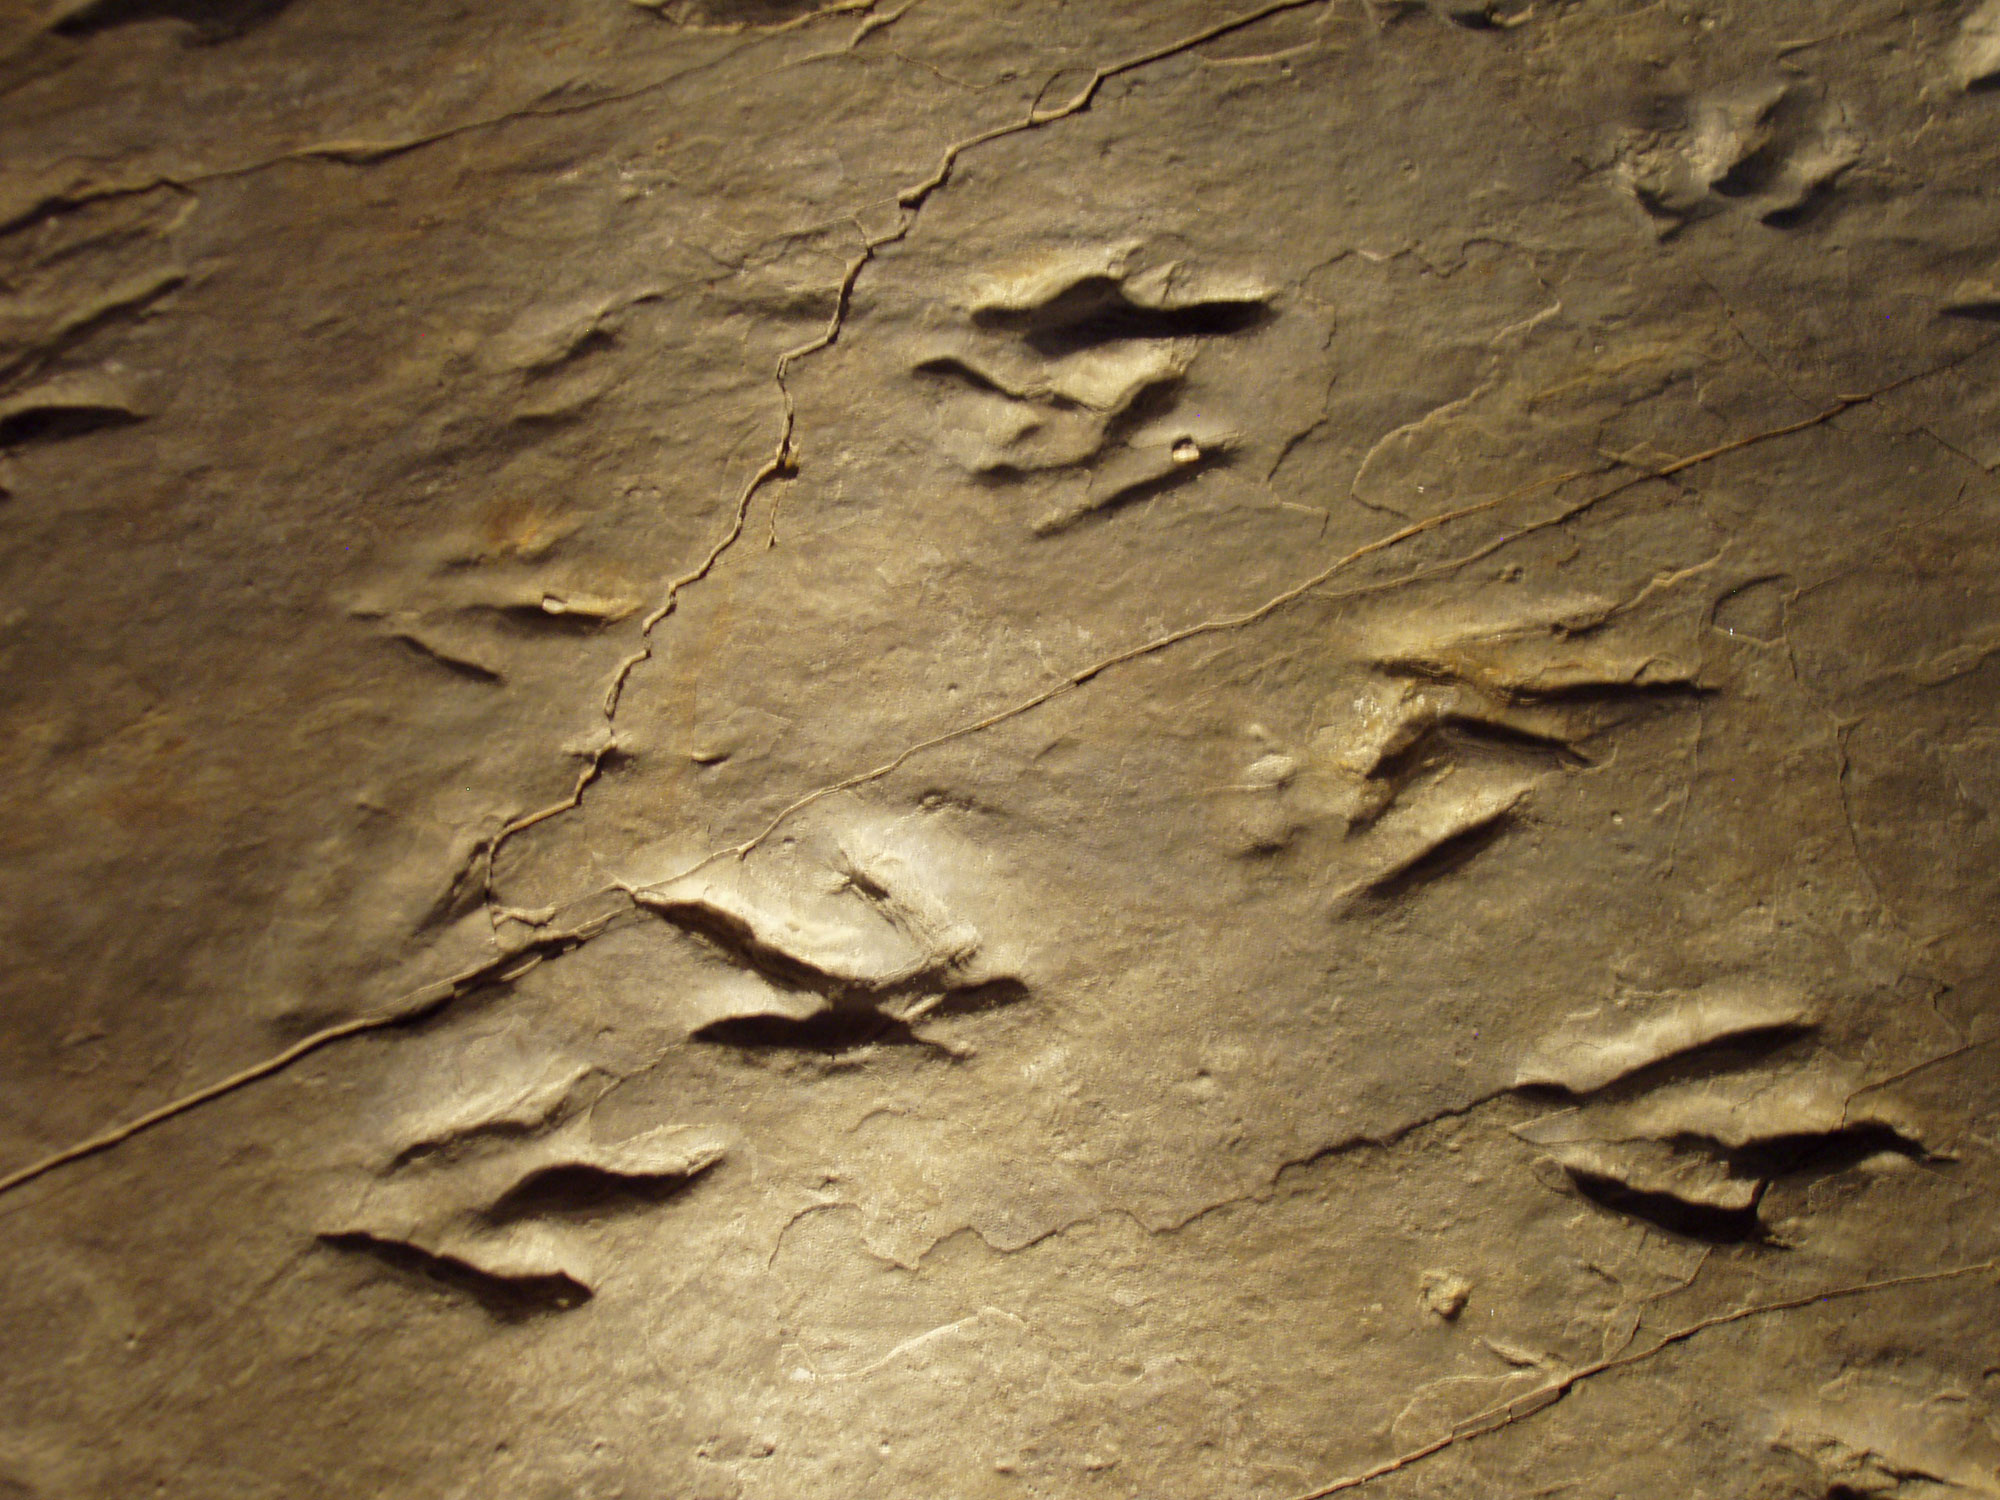 Photograph showing a close-up of three-toed dinosaur tracks preserved at Dinosaur State Park in Connecticut.